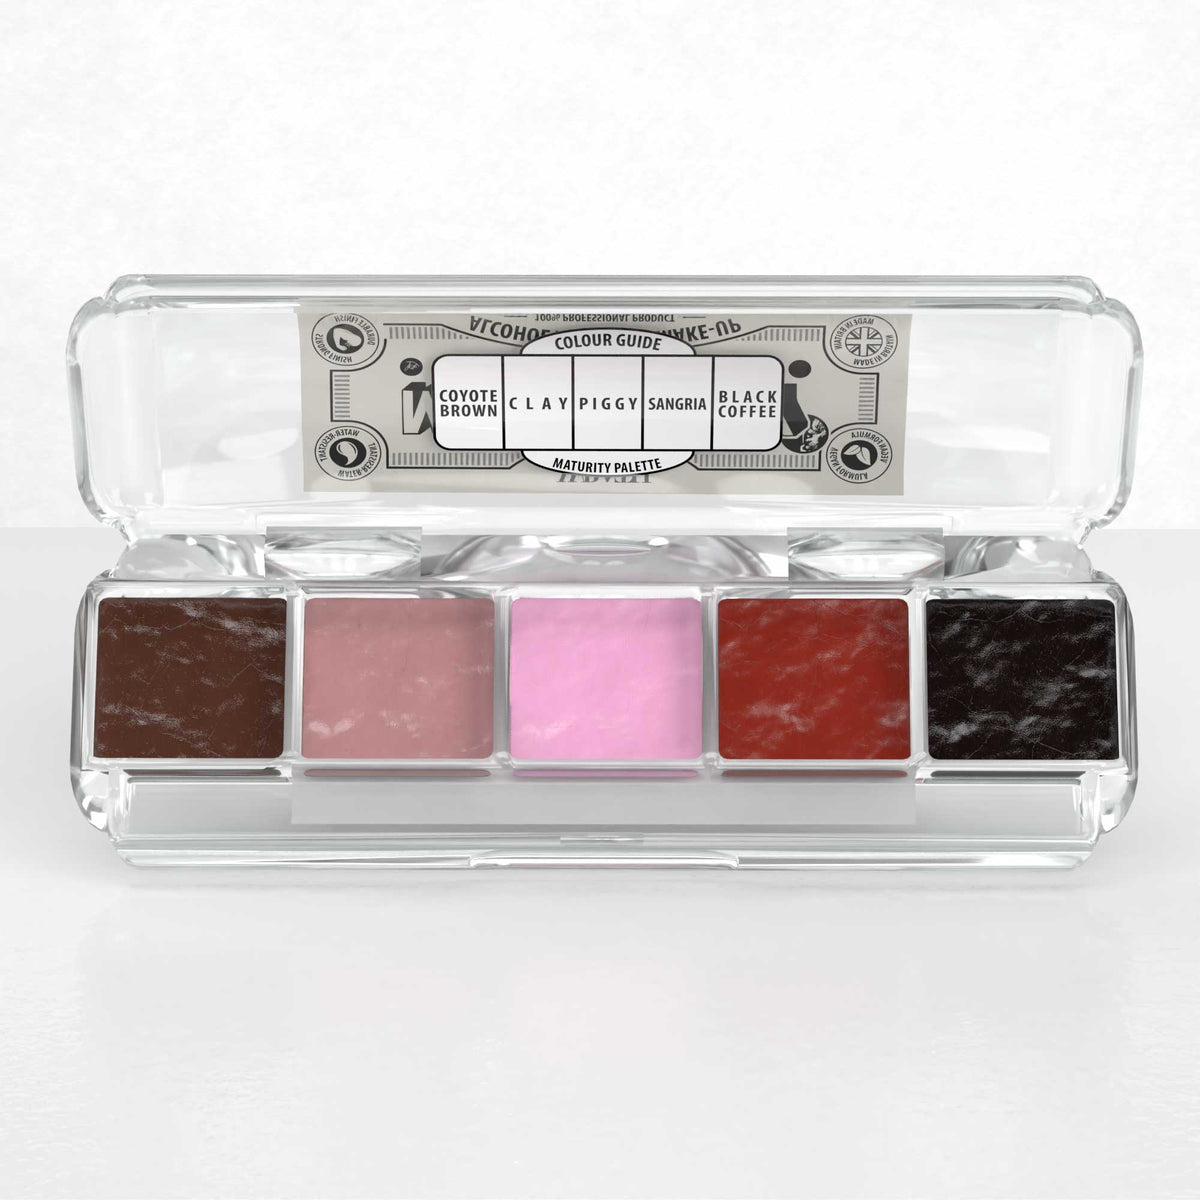 WRATH Alcohol Activated Make-up 5 Palette - Reife